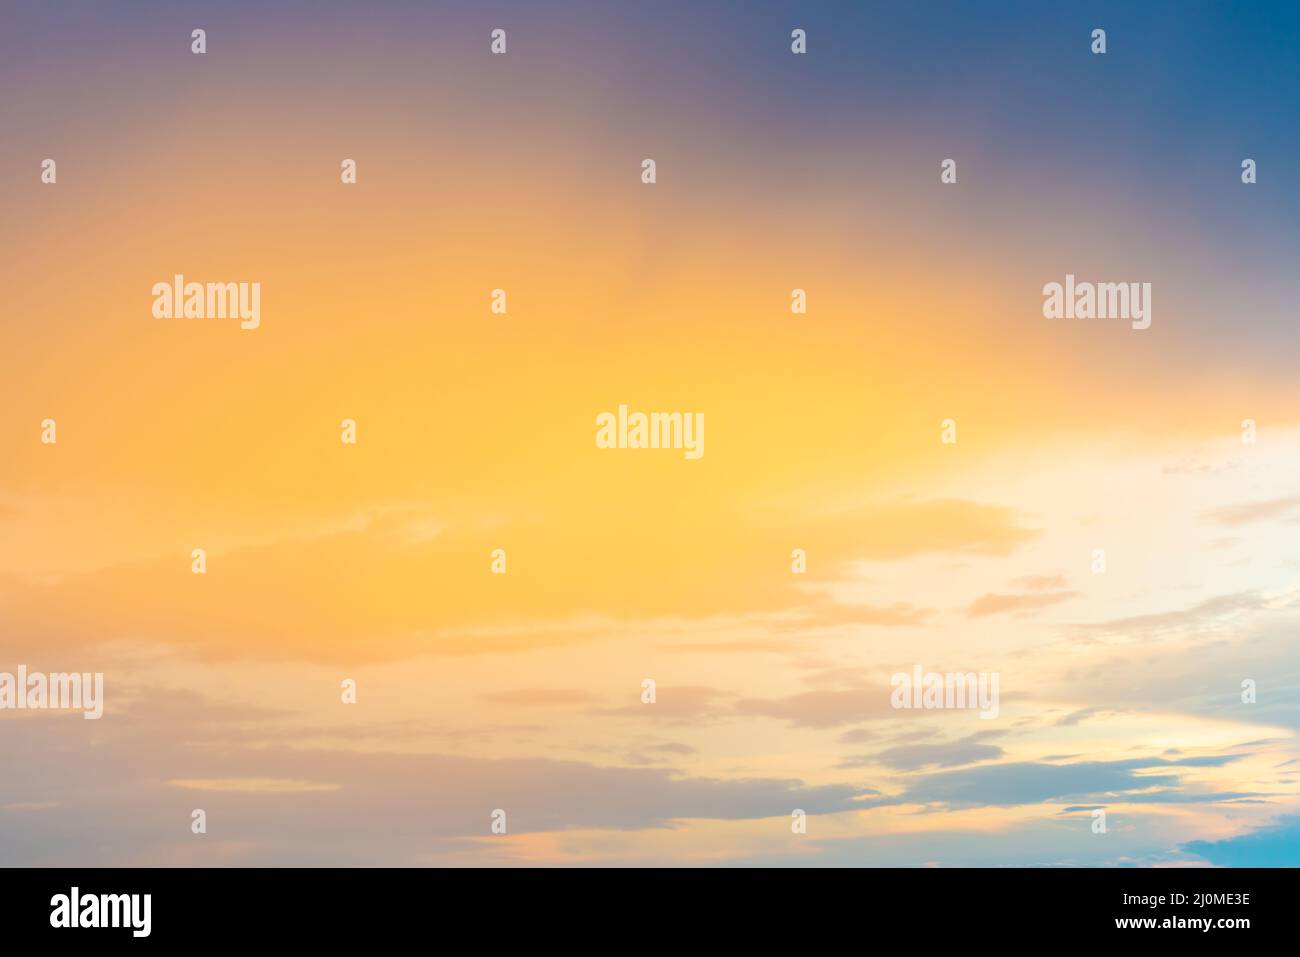 Sunset sky with dramatic clouds Stock Photo